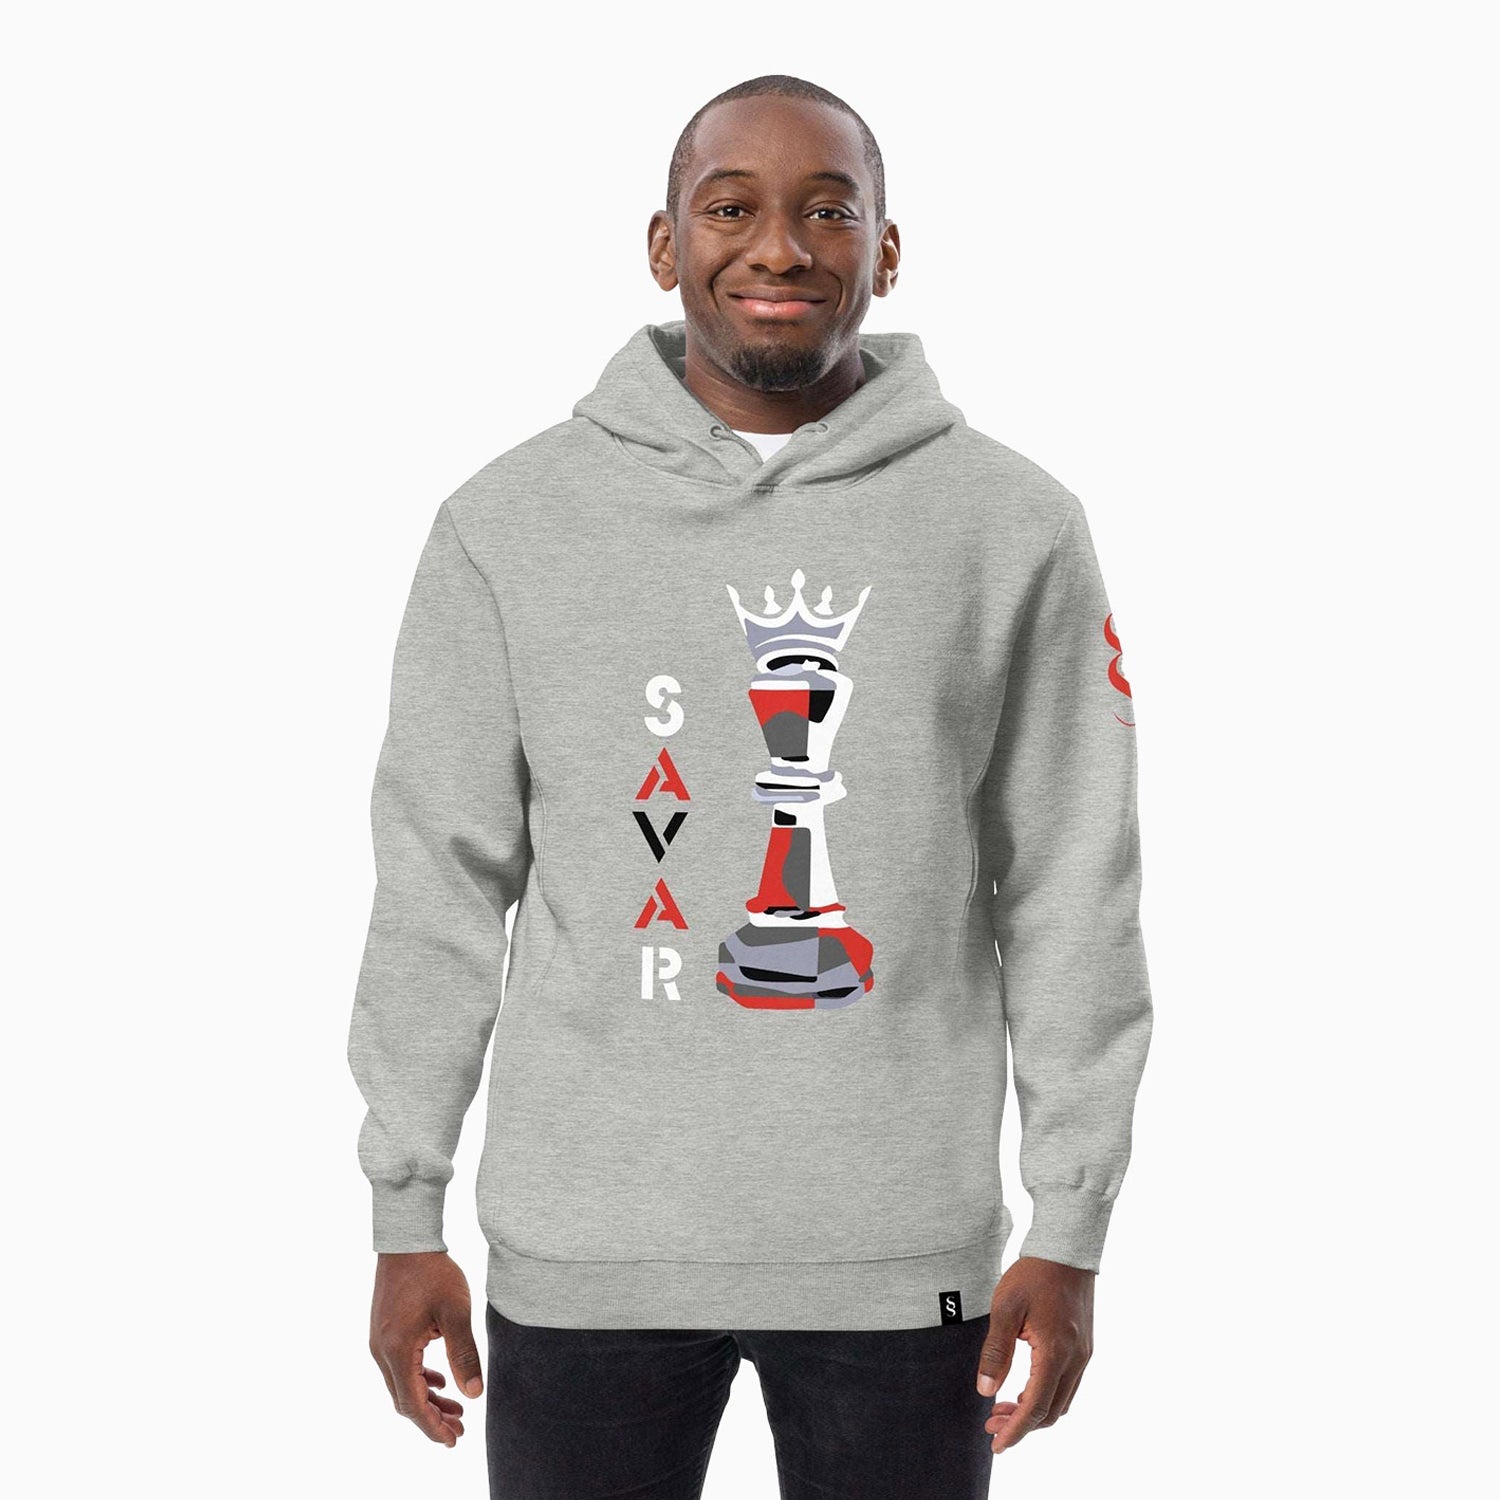 chess-design-printed-pull-over-grey-hoodie-for-men-sh101-063